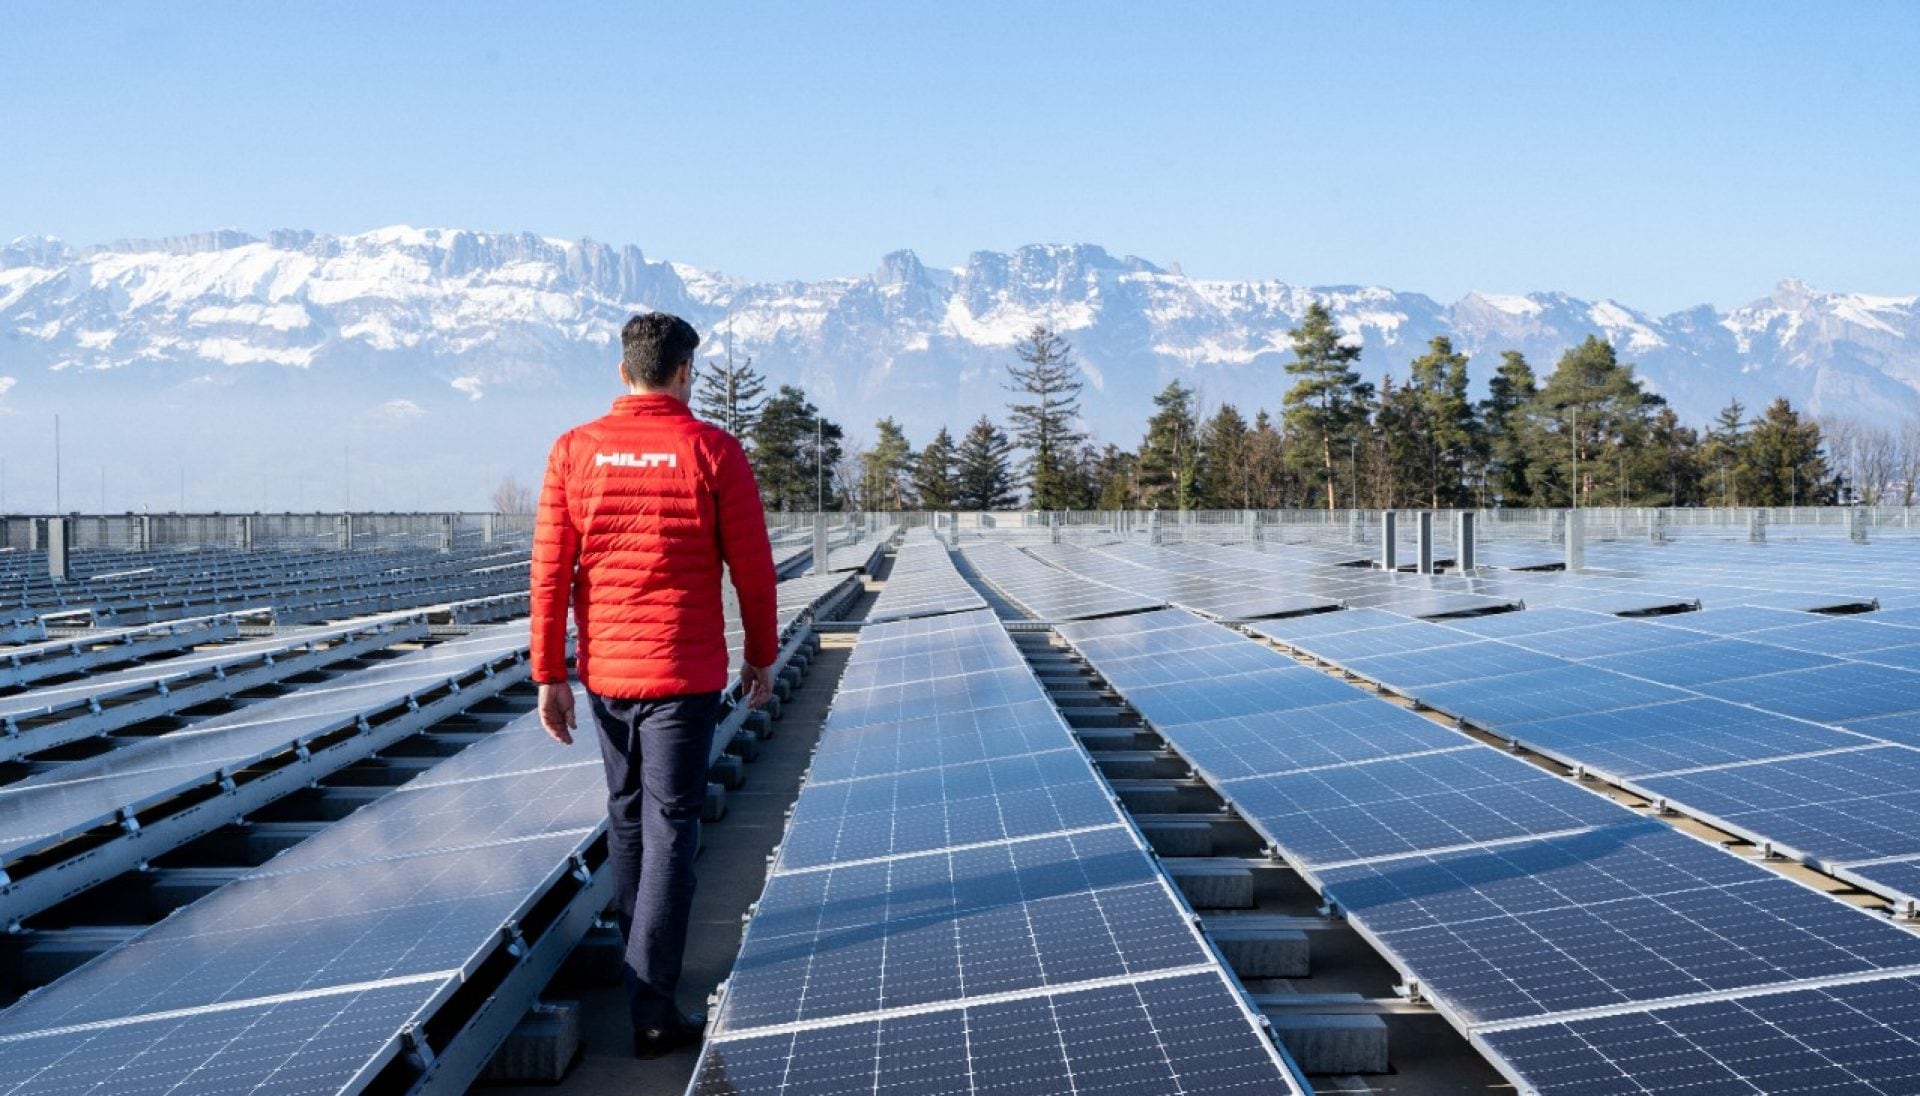 Man walking on roof next to solar panels in a mountain region.